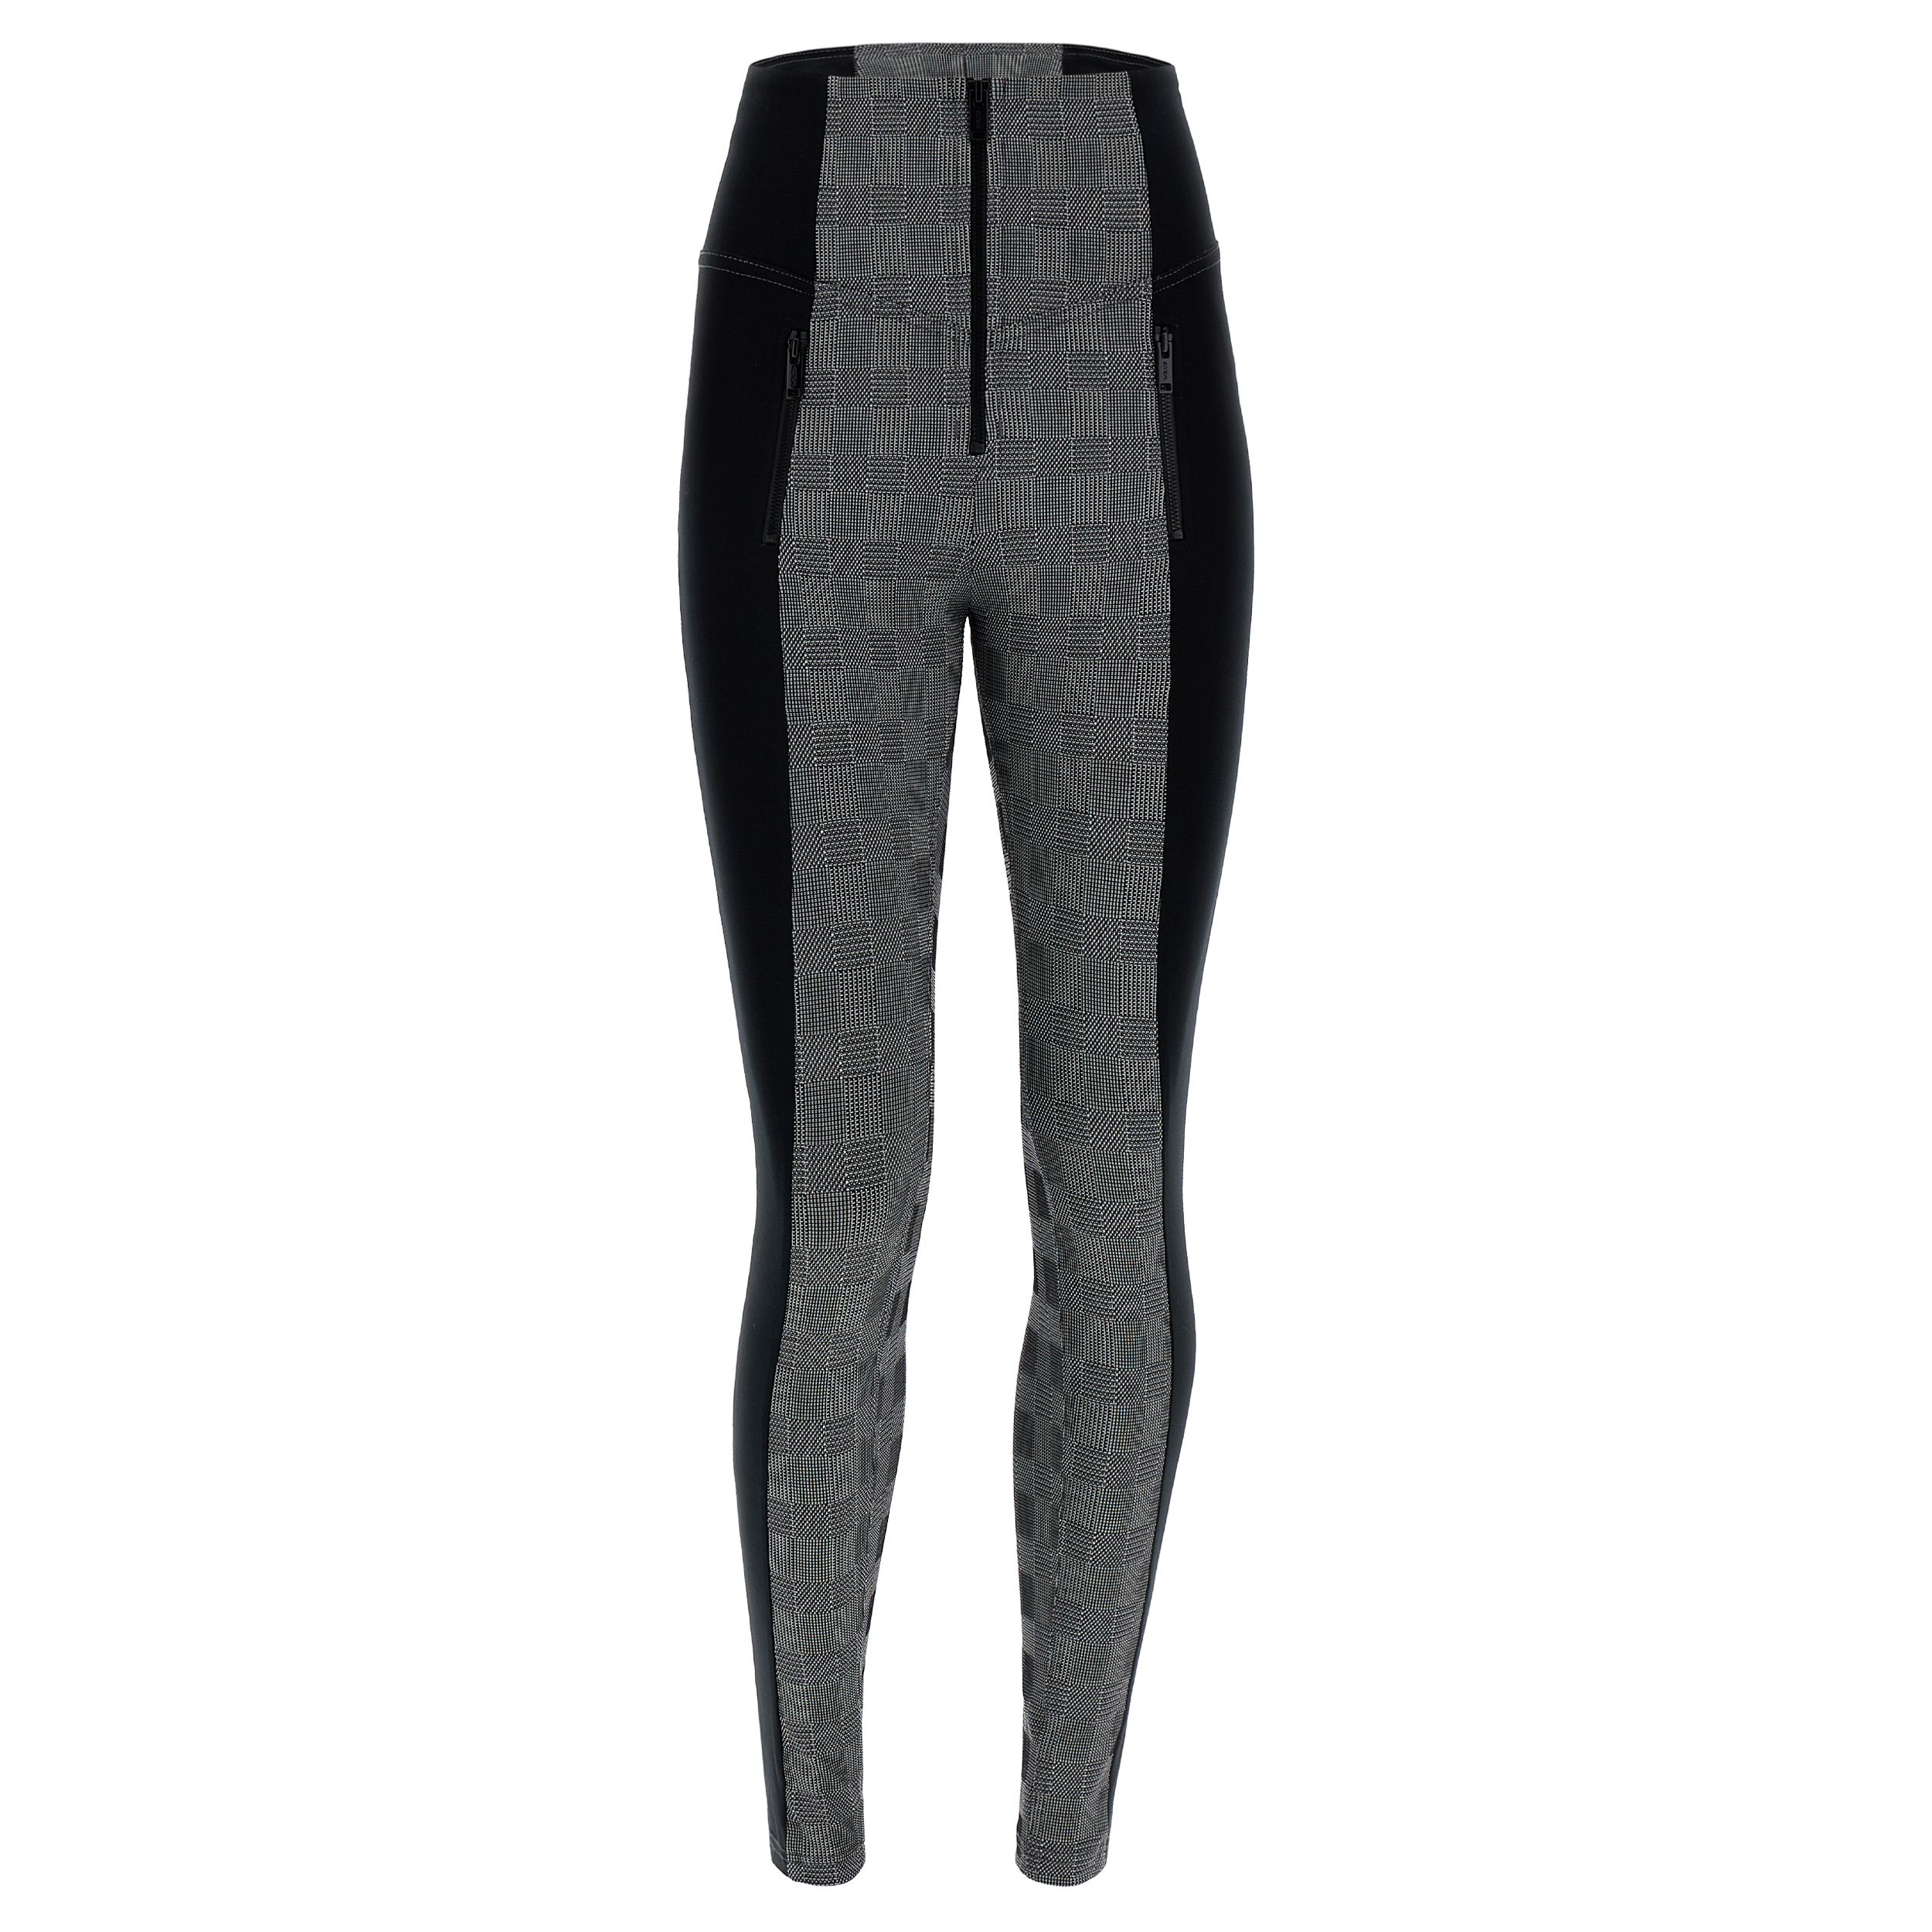 Ankle-length WR.UP® Sport shaping leggings with a classic WR.UP